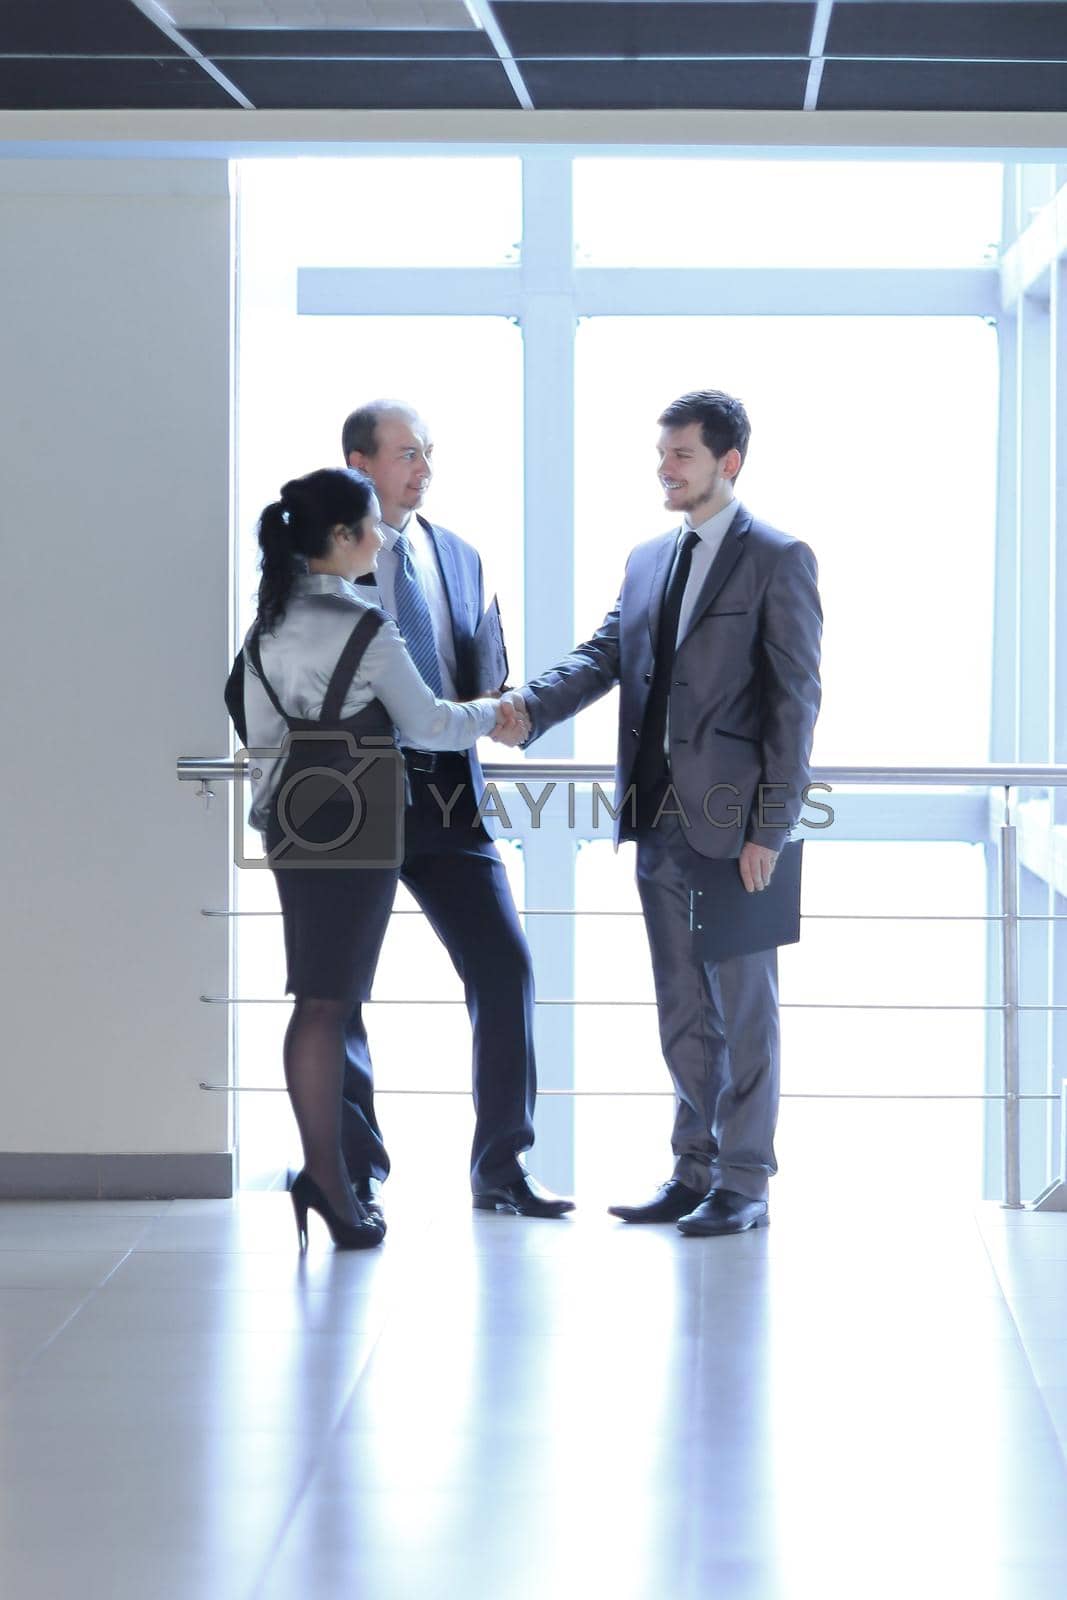 Royalty free image of Manager welcomes the client in the lobby office by SmartPhotoLab